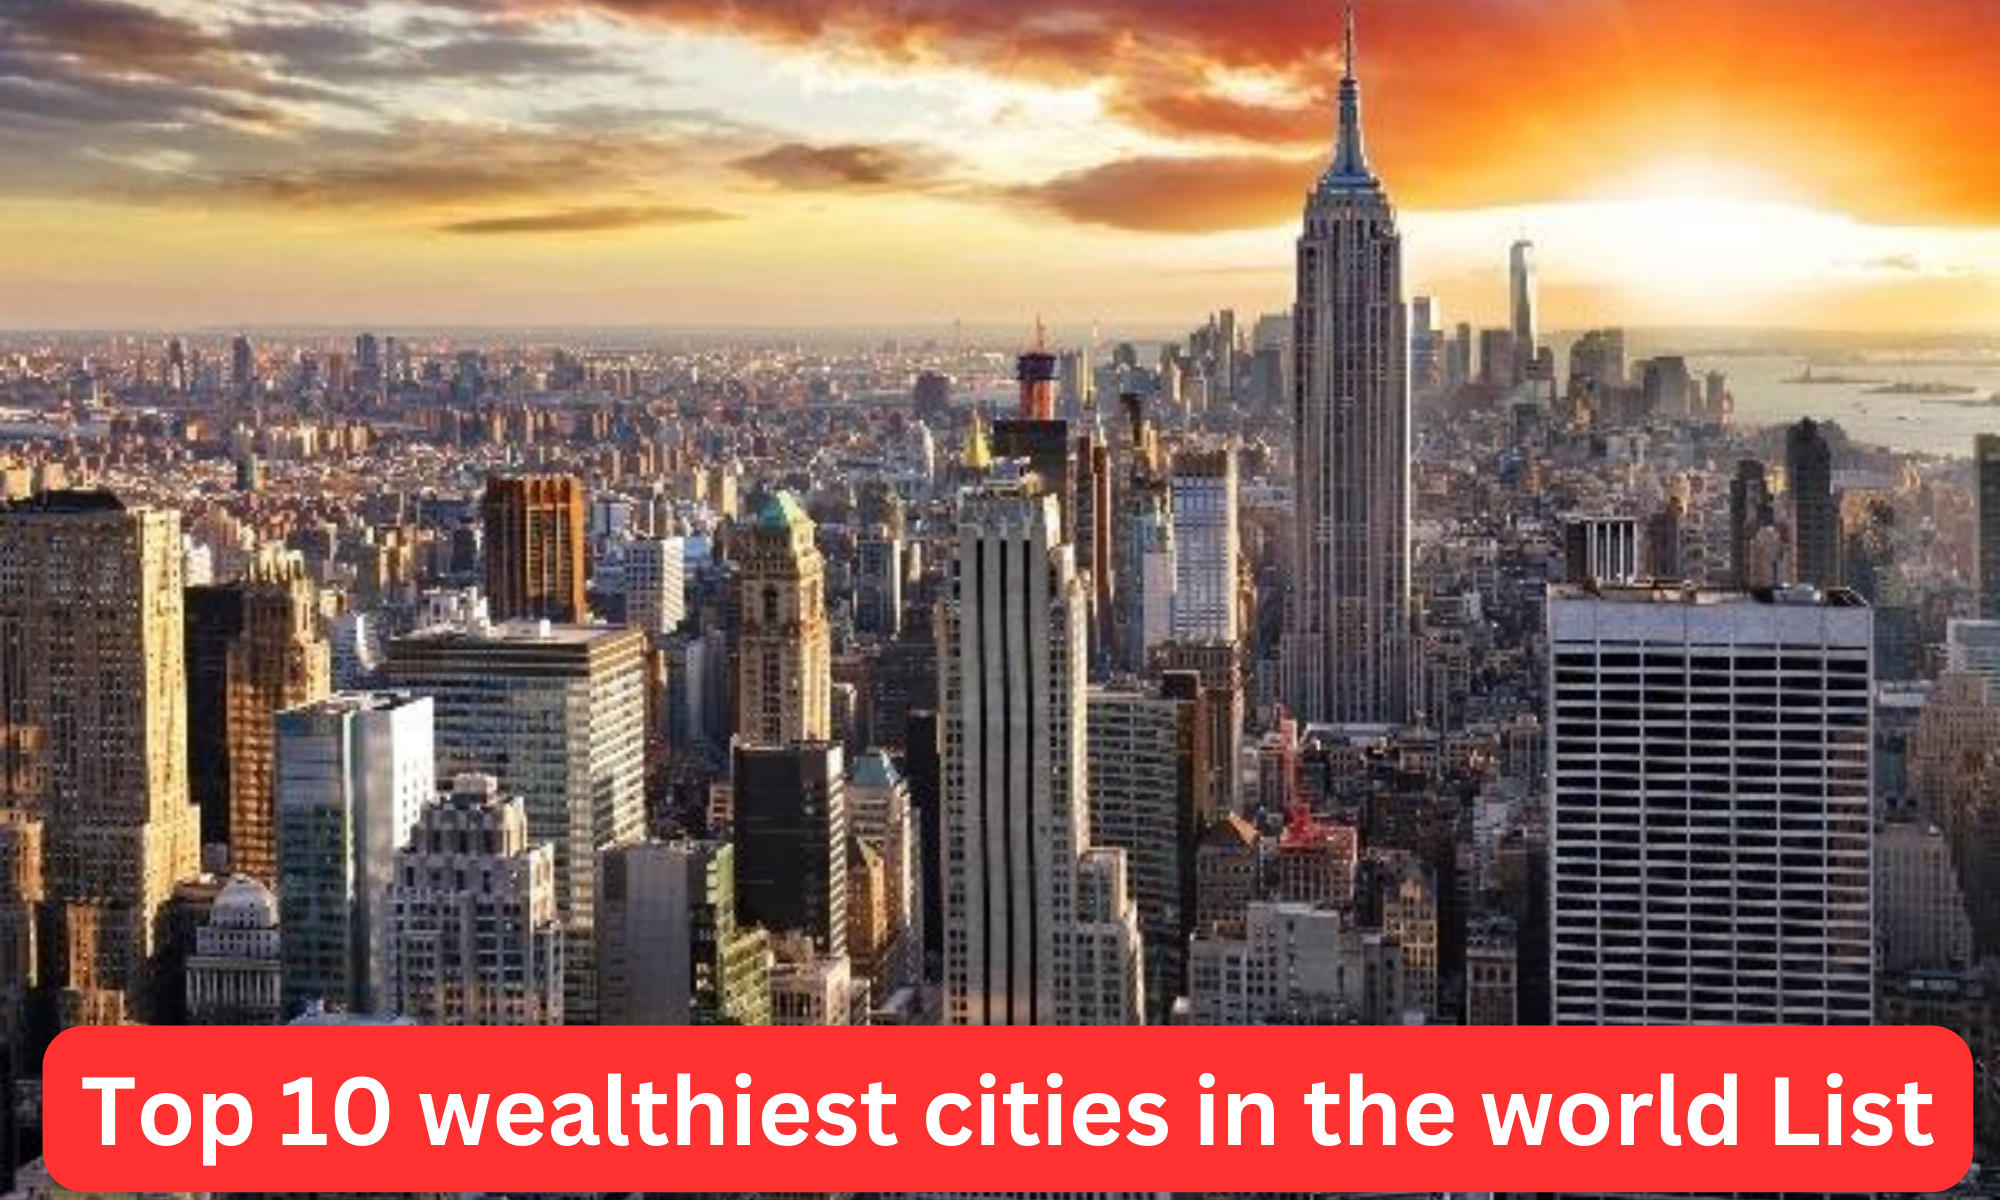 Top 10 wealthiest cities in the world Complete List_40.1